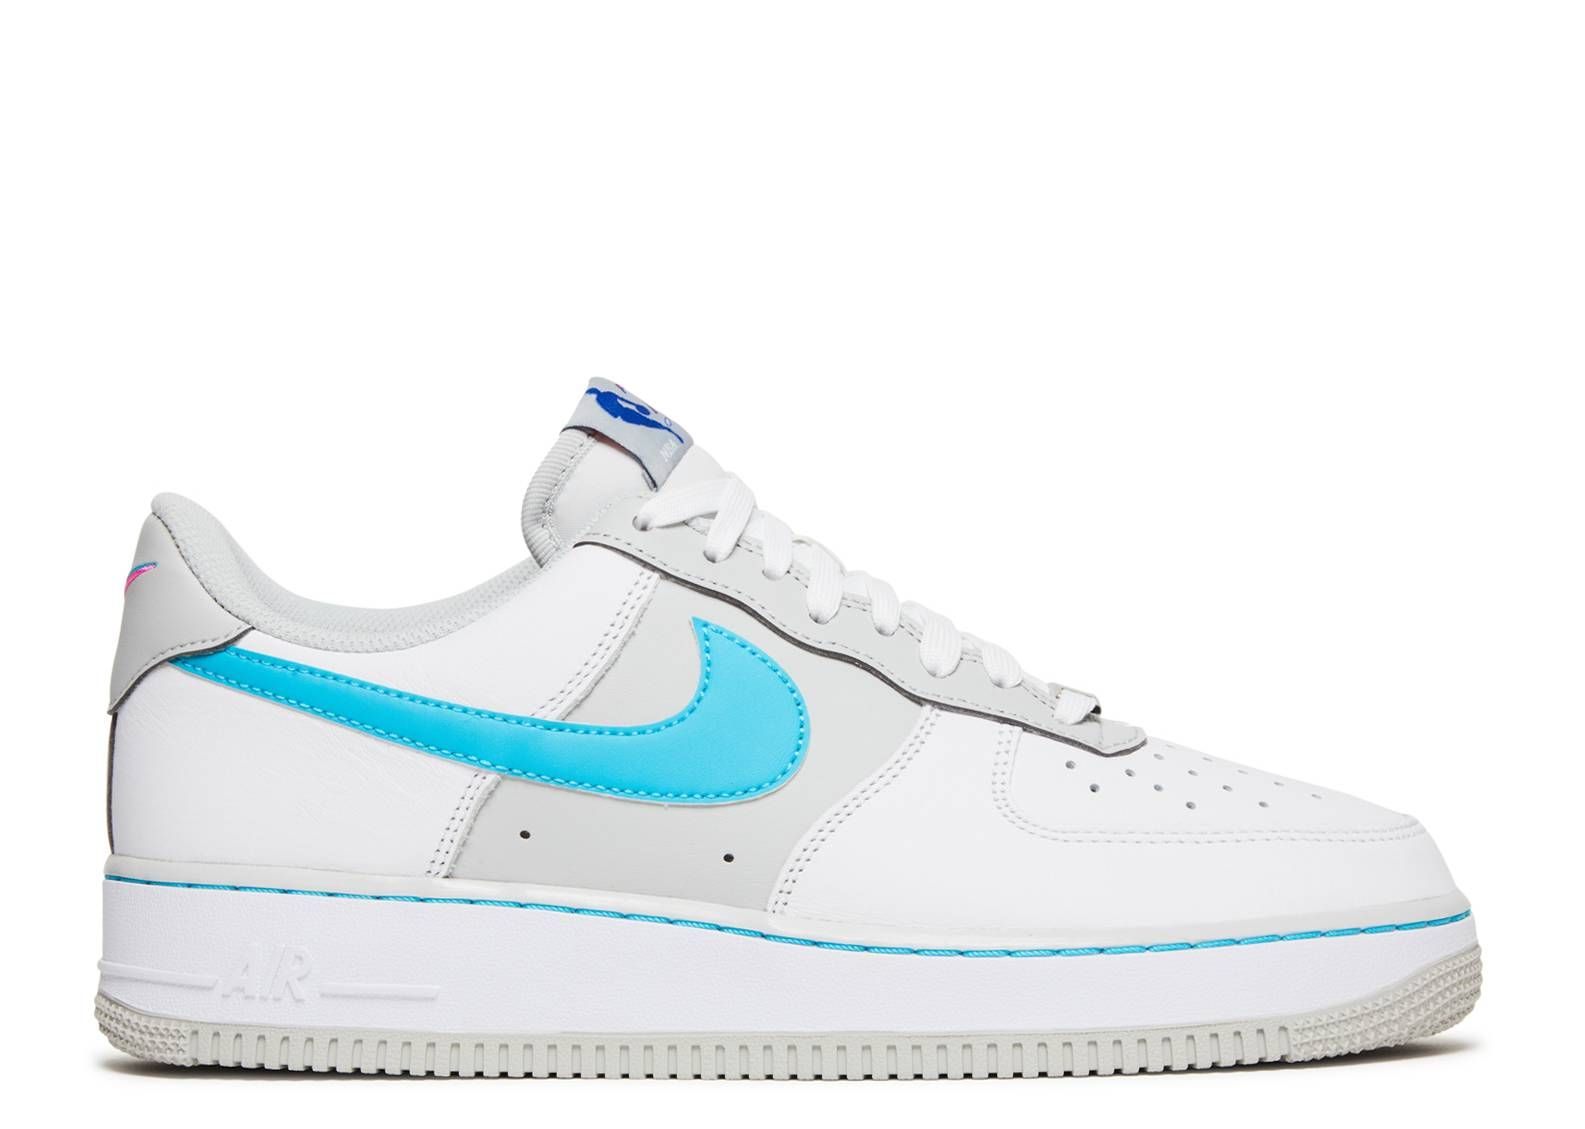 Nike Air Force 1 LV8 NBA 75th Anniversary Spurs Sample | Size 9, Sneaker in Teal/Blue/White